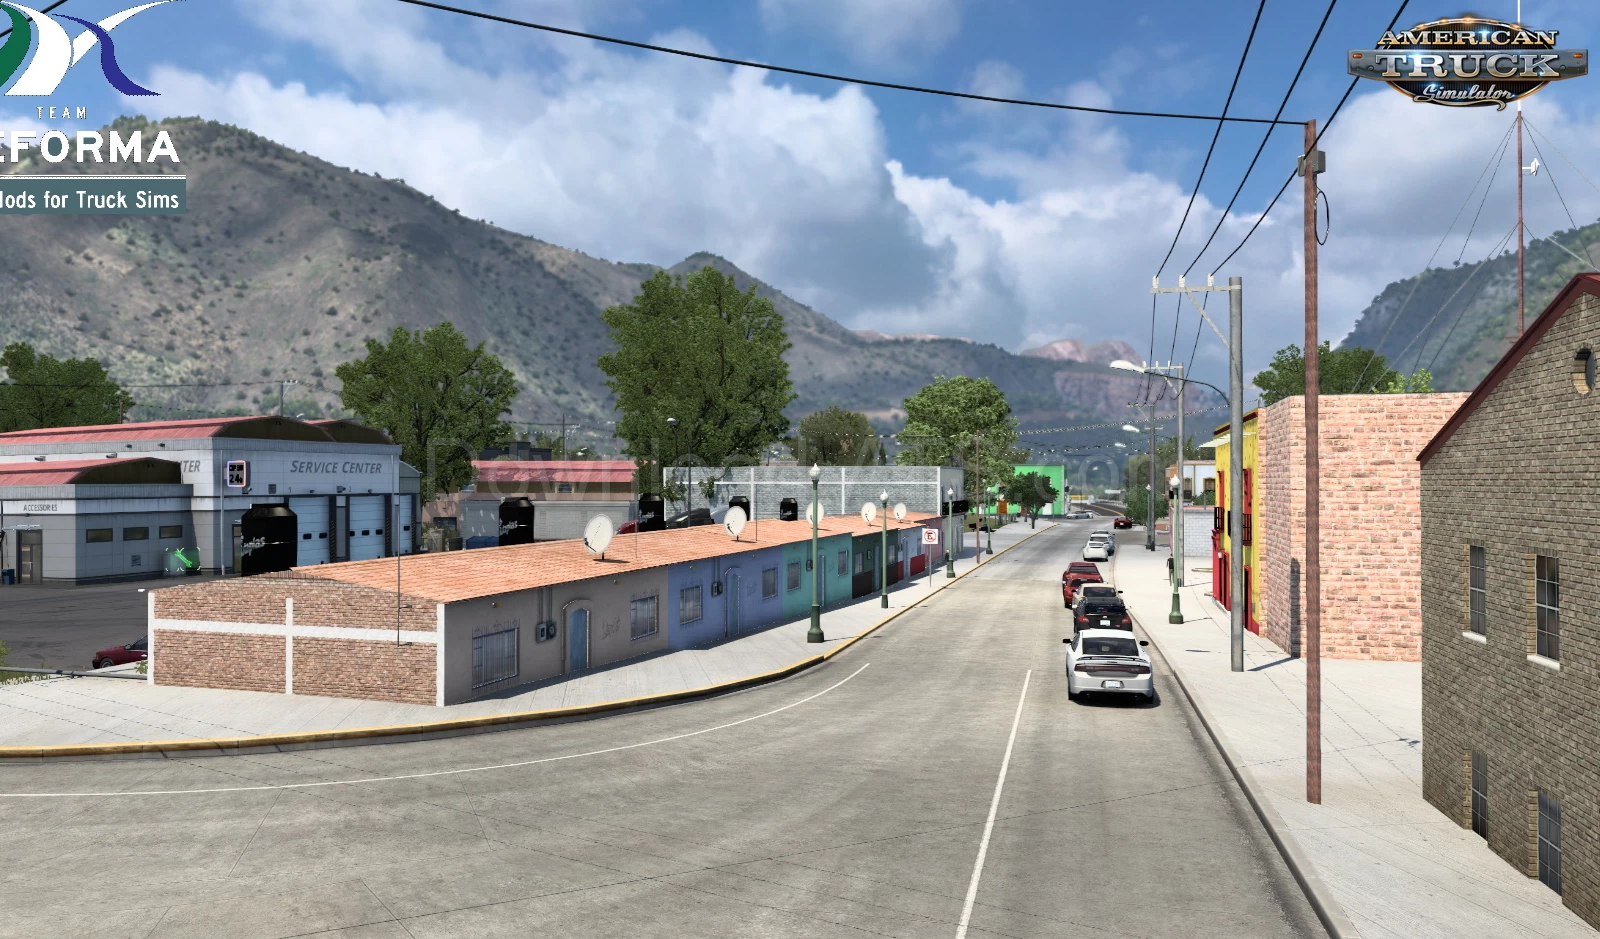 Reforma Map v2.4.4 (1.46.x) for ATS